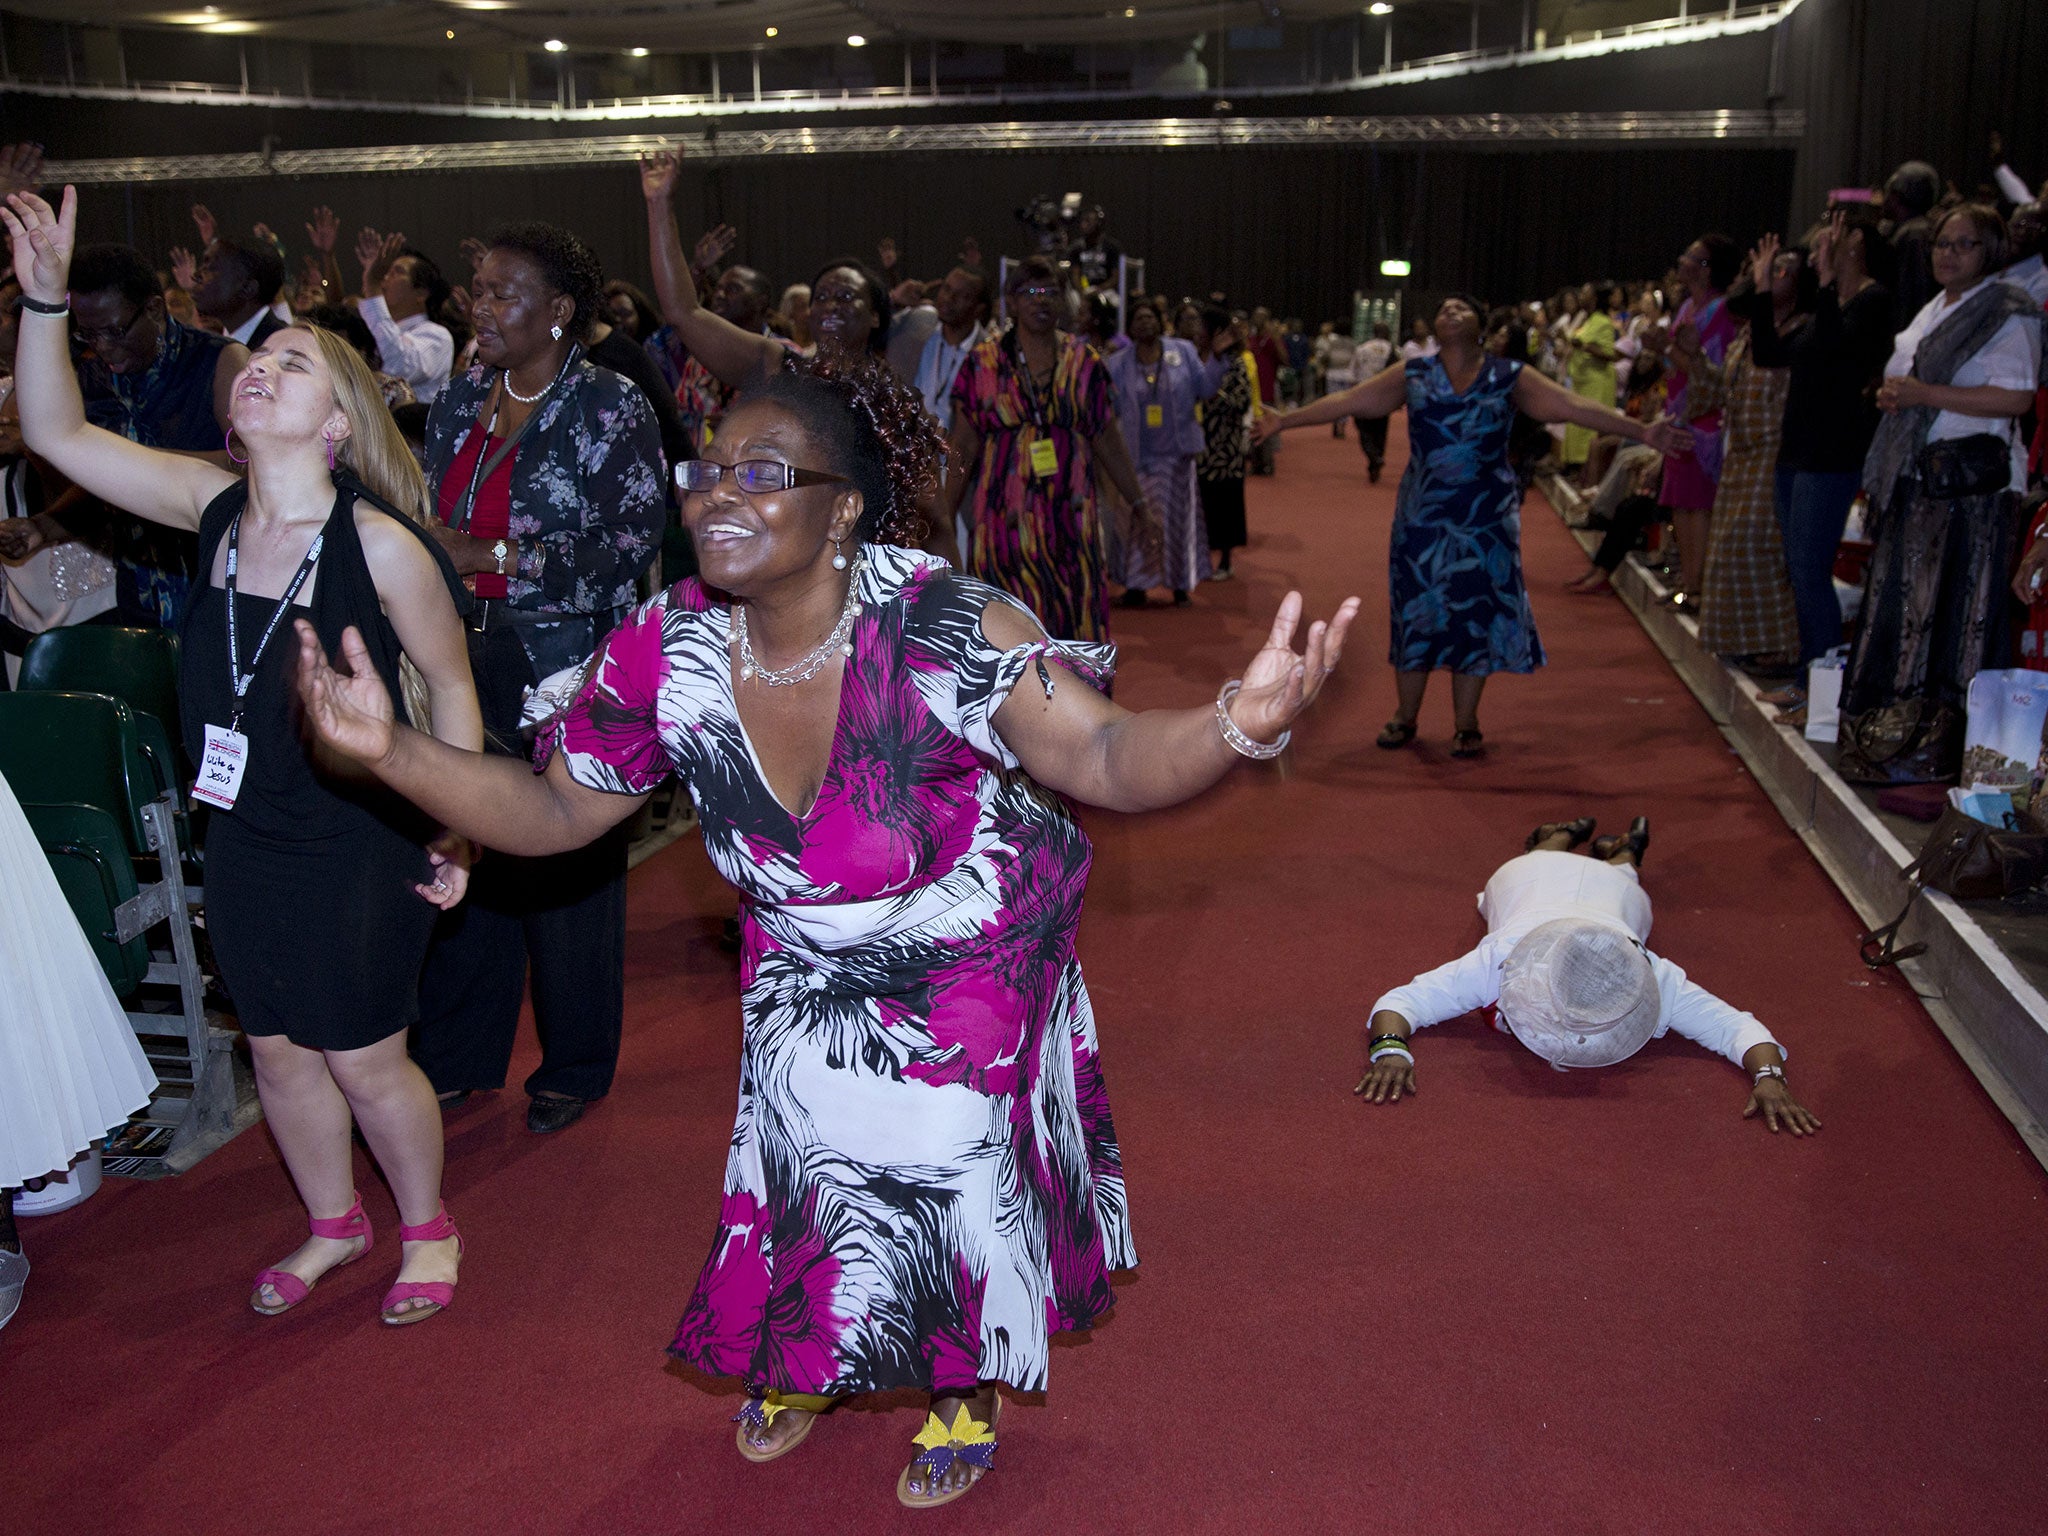 The audience expressing their love for Jesus